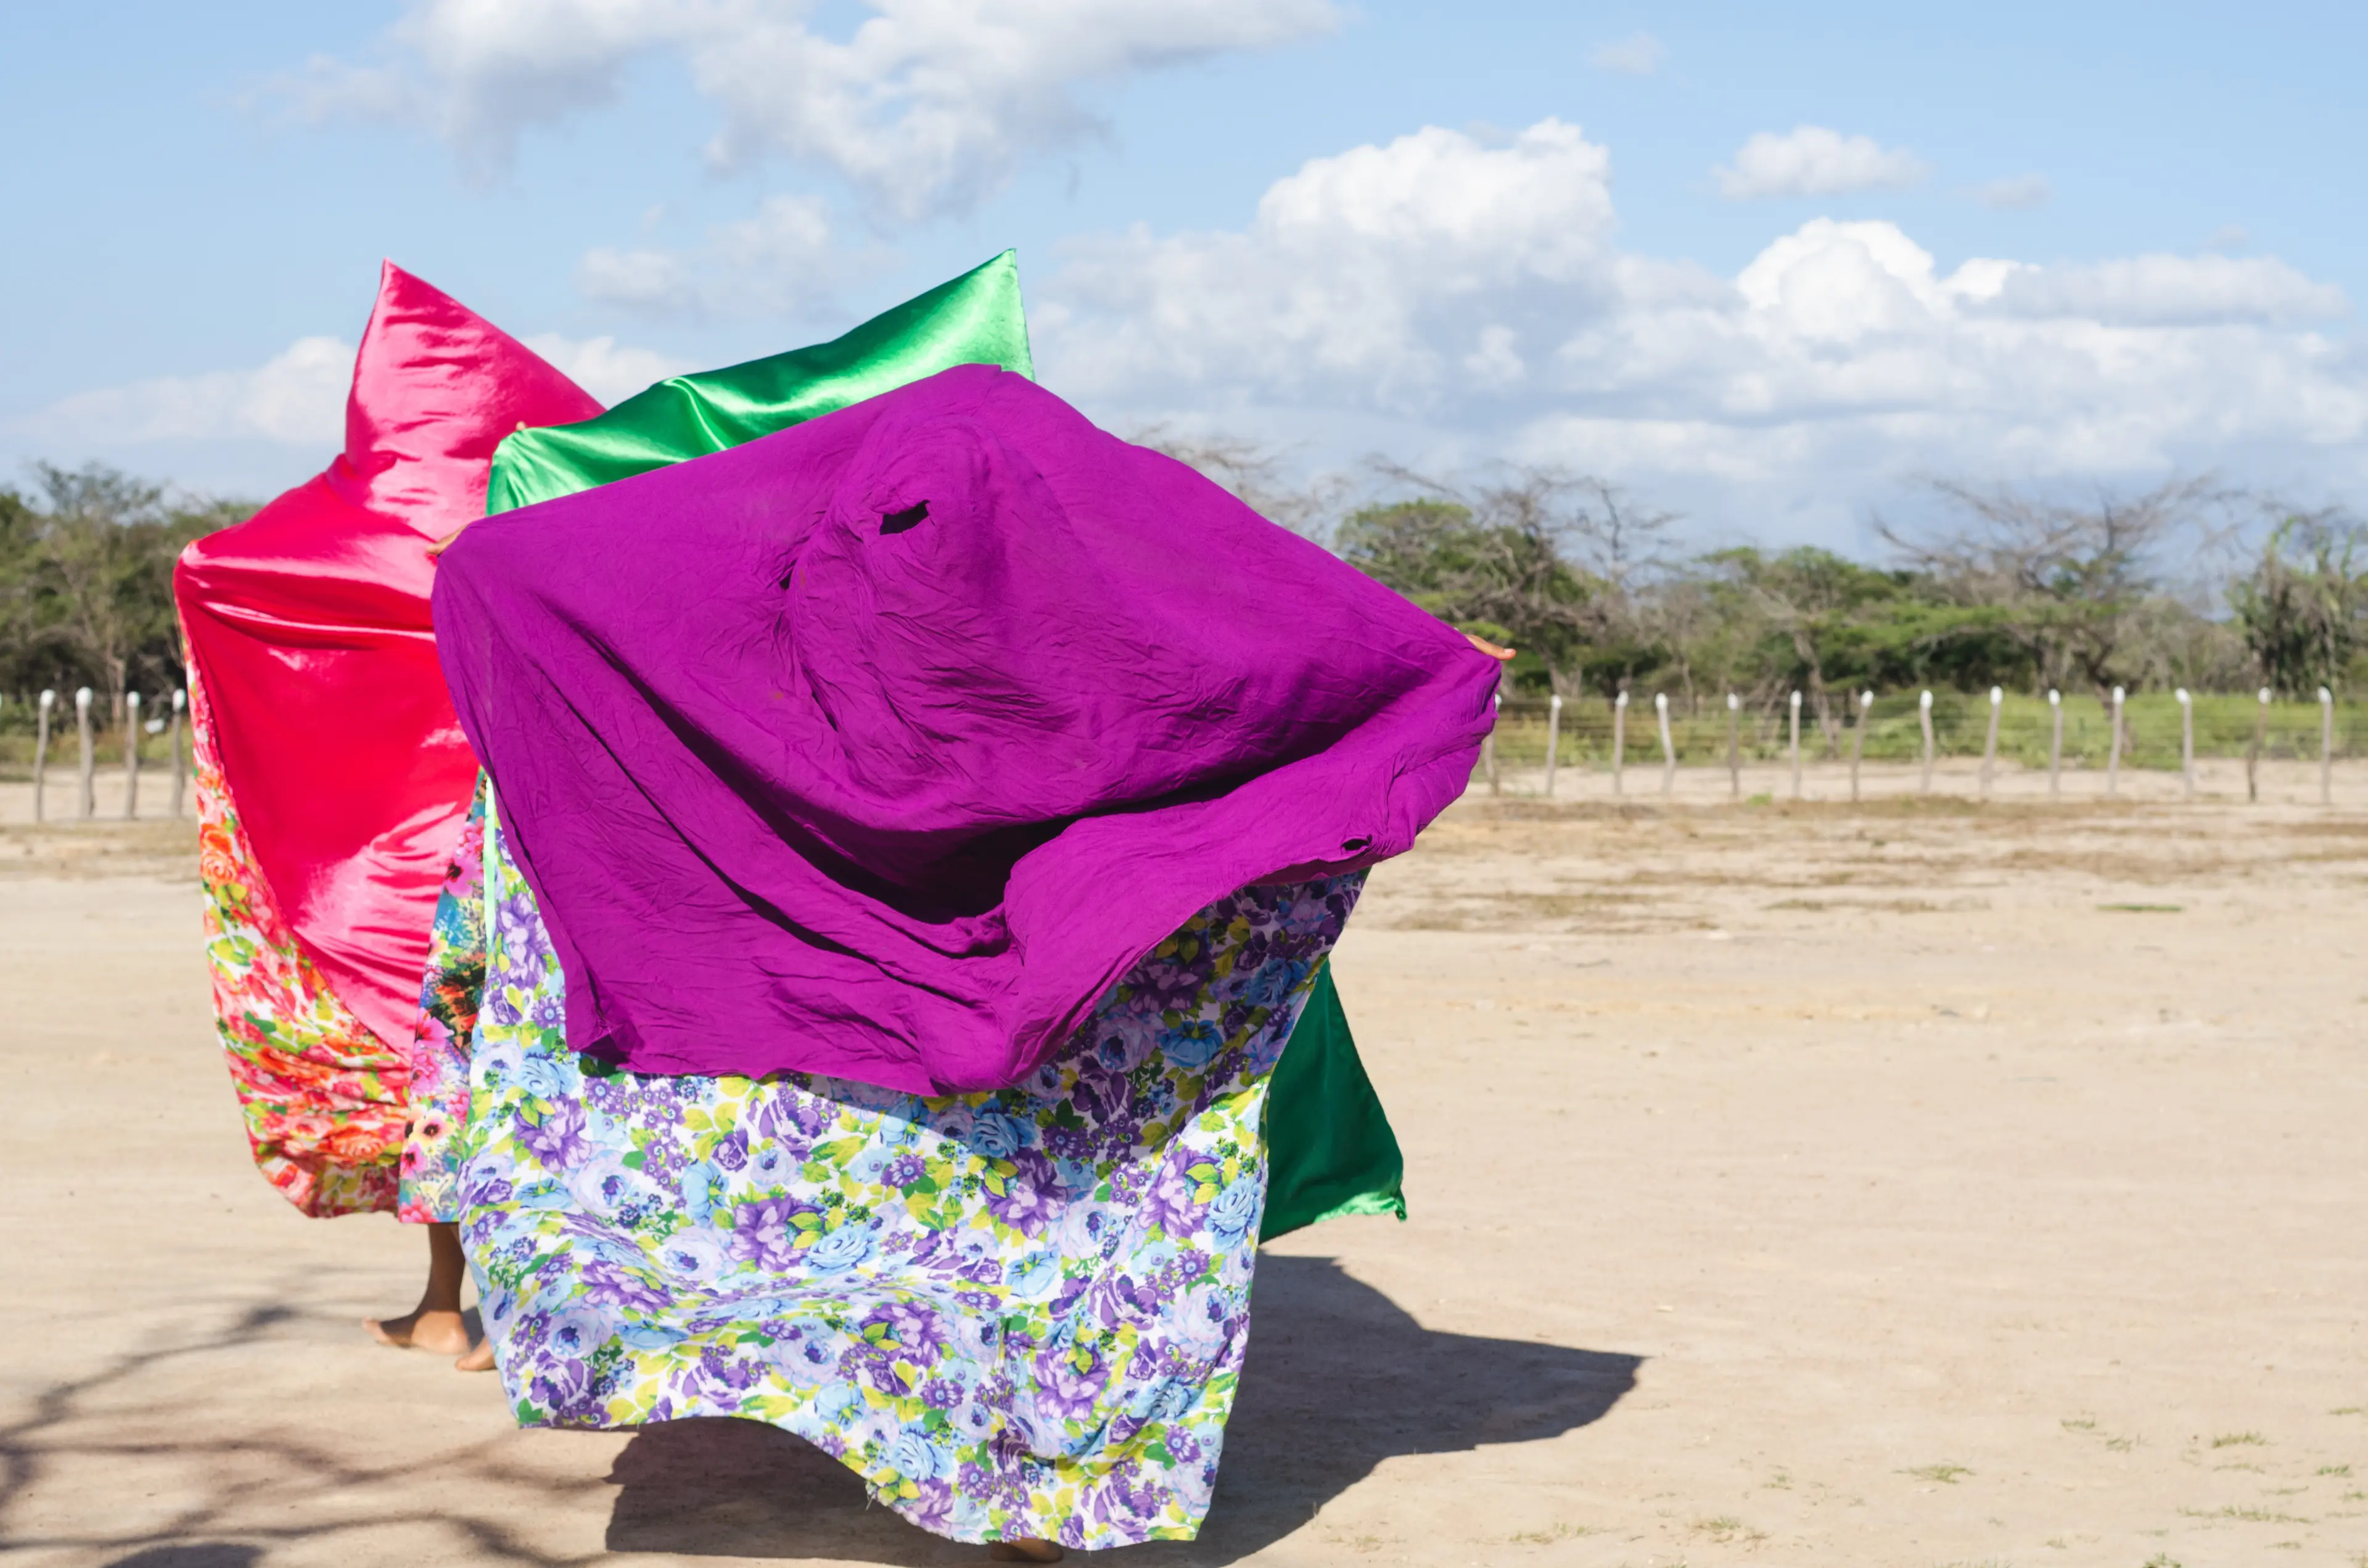 Three women with colorful capes dancing typical Wayuu dance. Indigenous culture of La Guajira